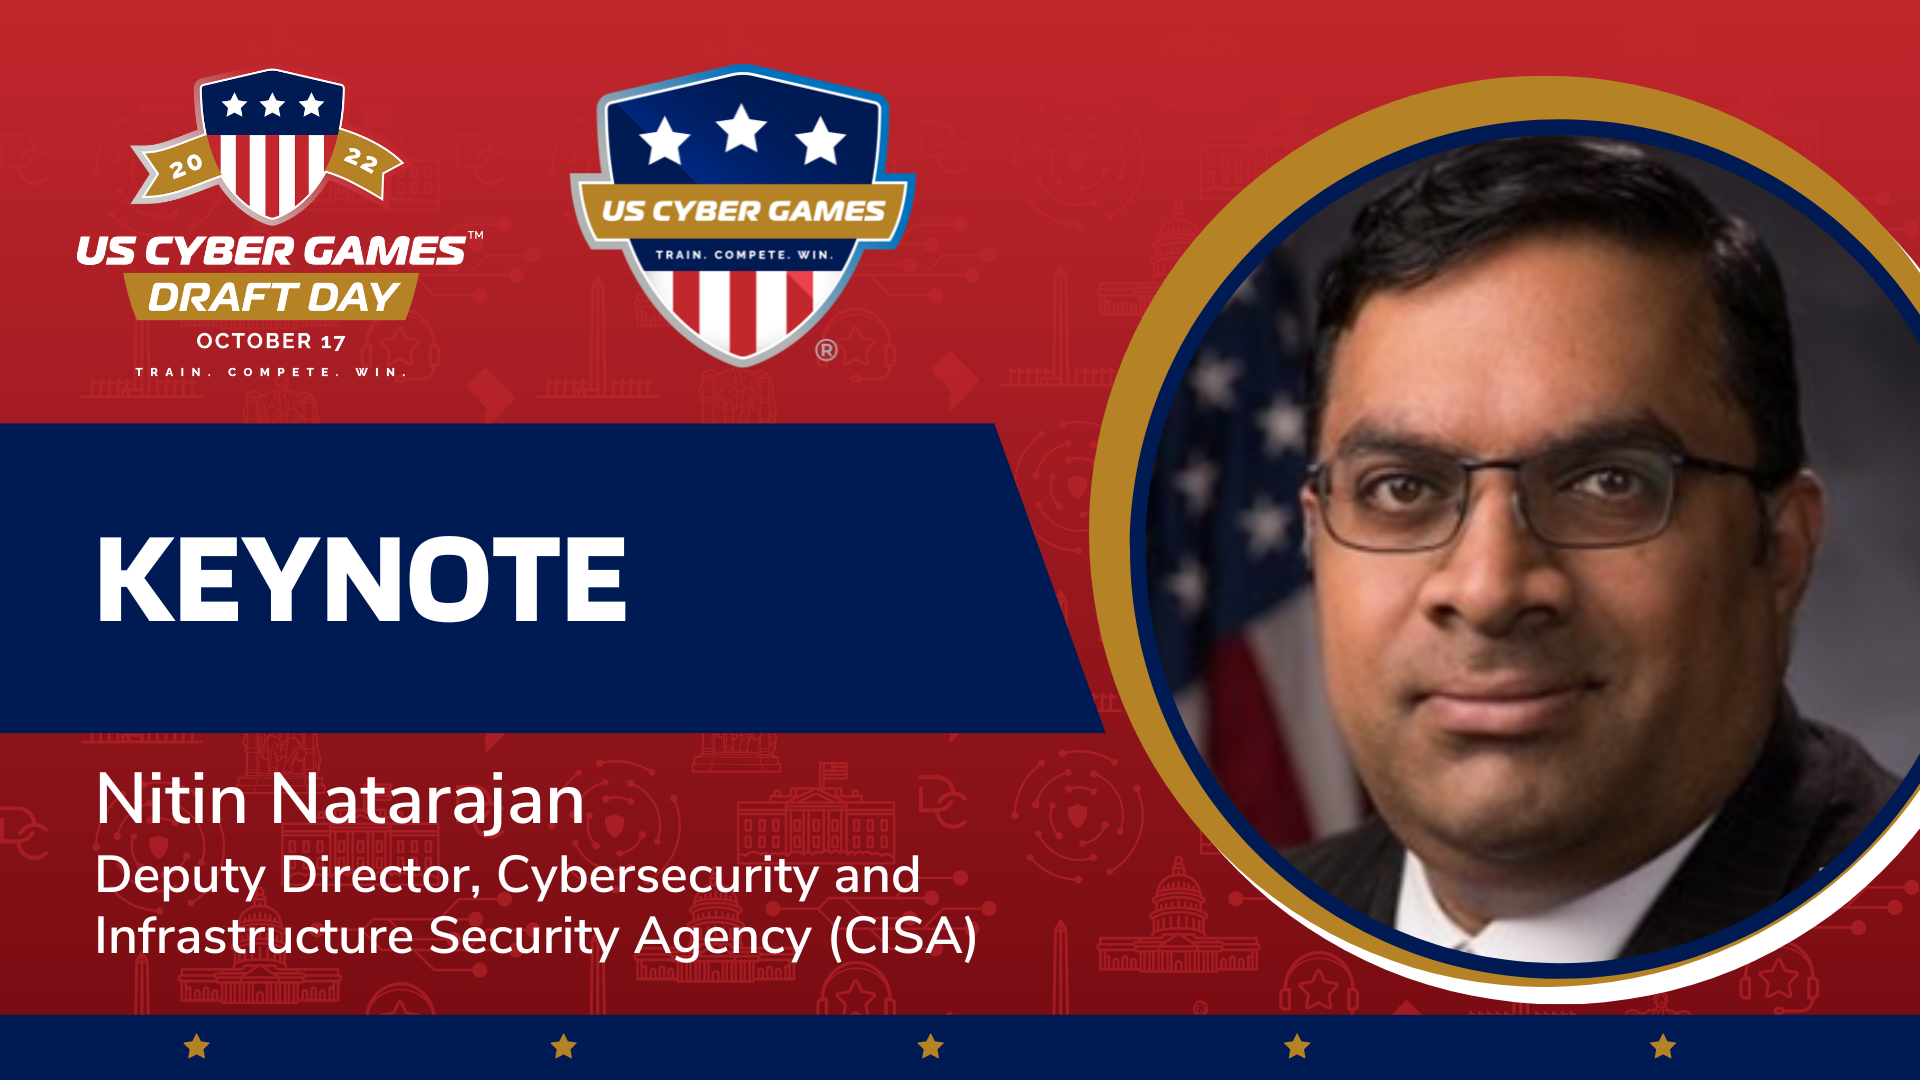 Watch the Season II, US Cyber Games Draft Day keynote with Nitin Natarajan, Deputy Director, Cybersecurity and Infrastructure Security Agency (CISA).